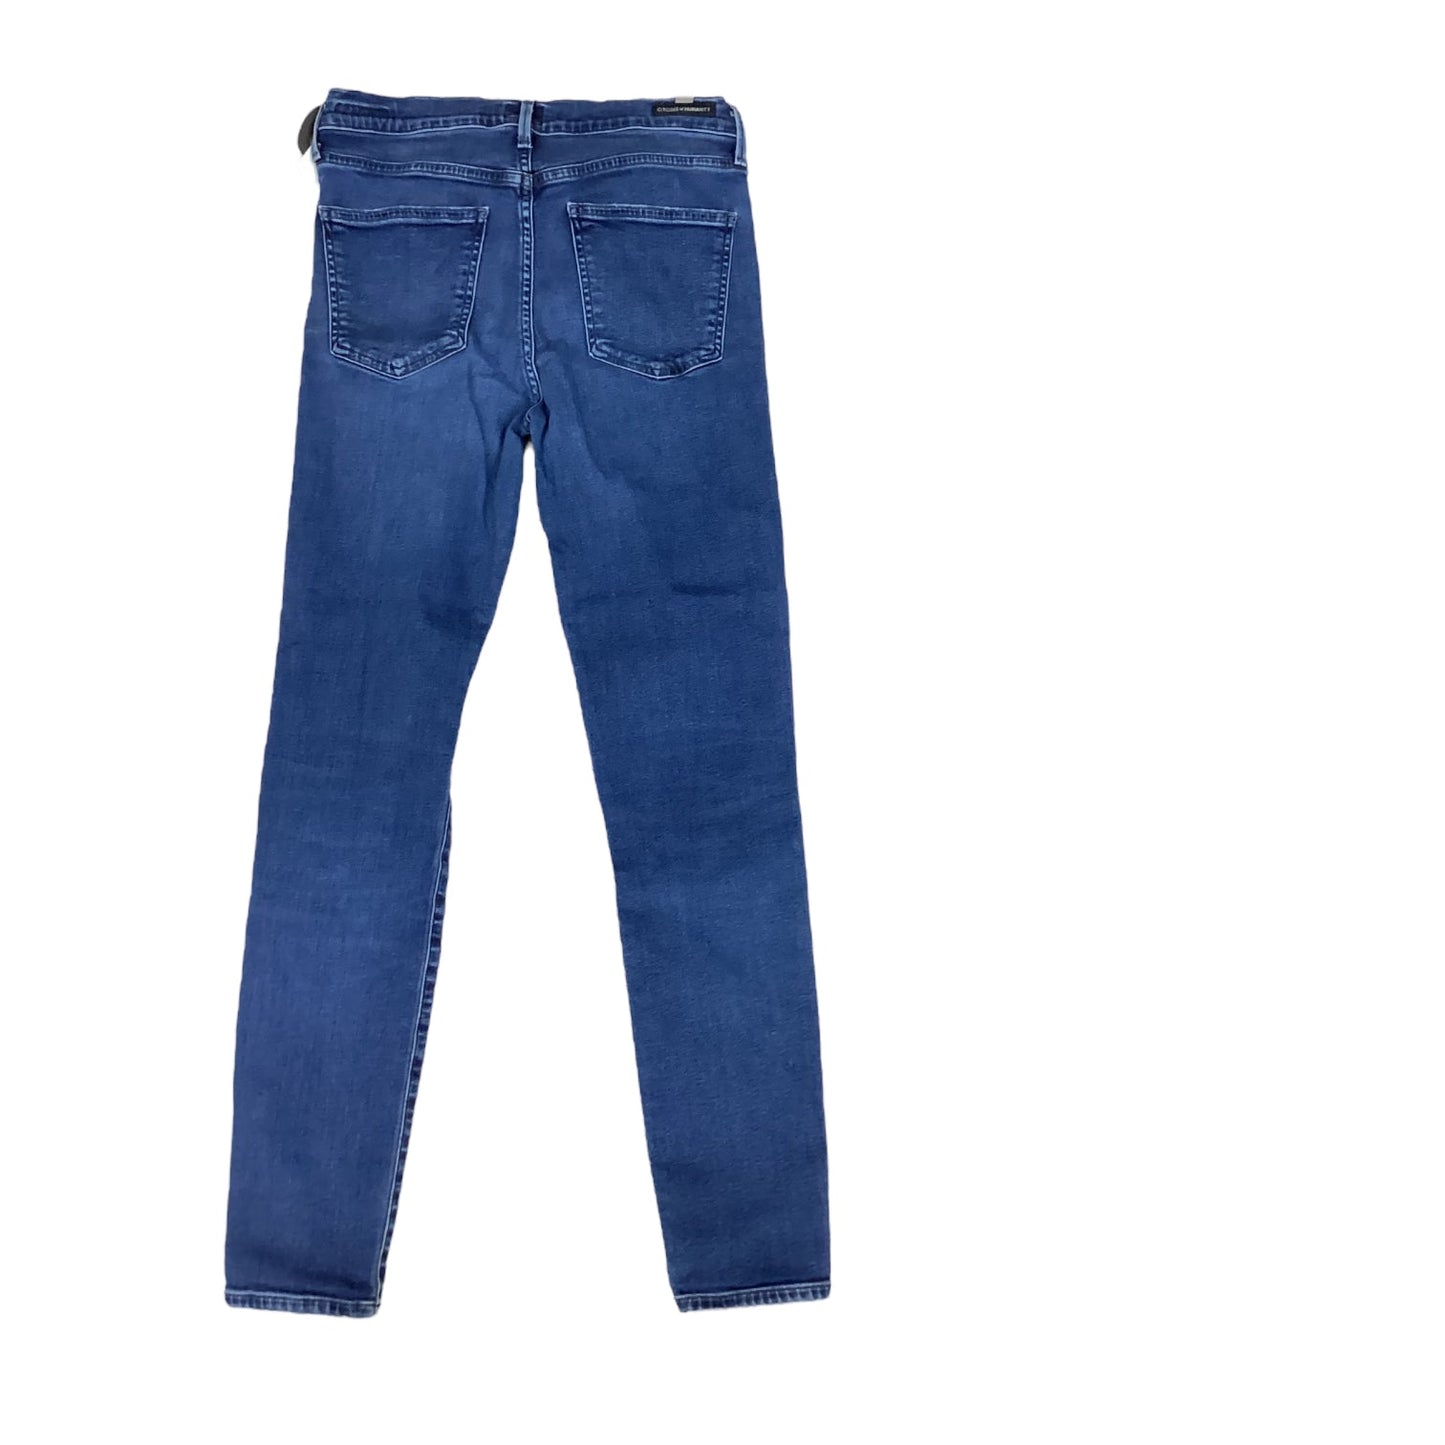 Jeans Skinny By Citizens  Size: 8